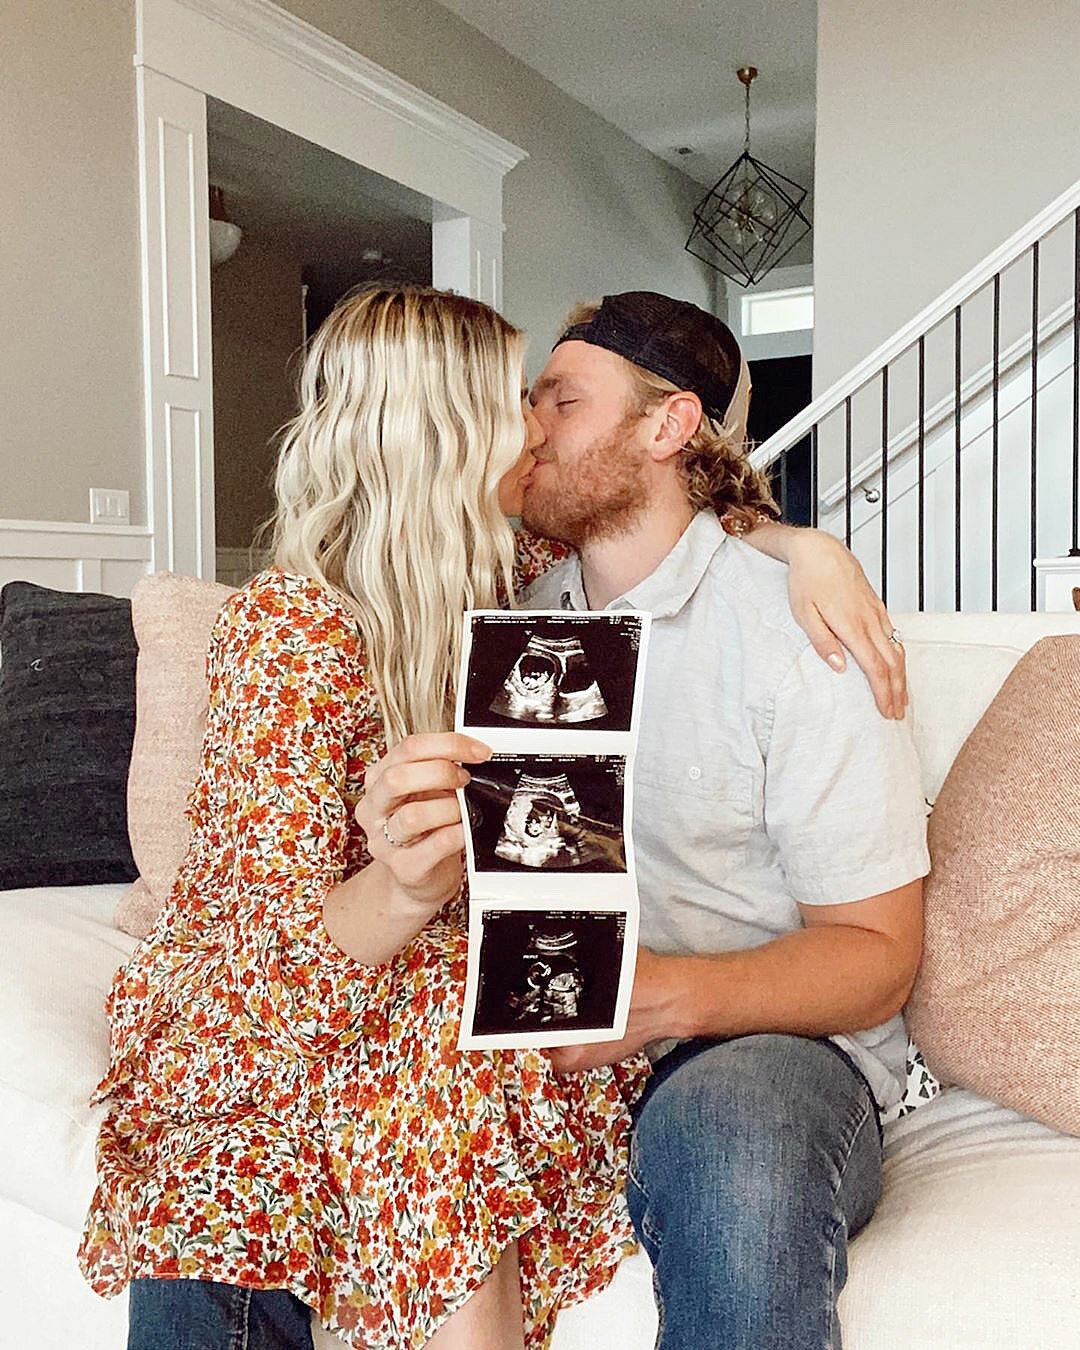 Dancing With the Stars Lindsay Arnold Is Expecting Her 1st Child With Husband Sam Cusick